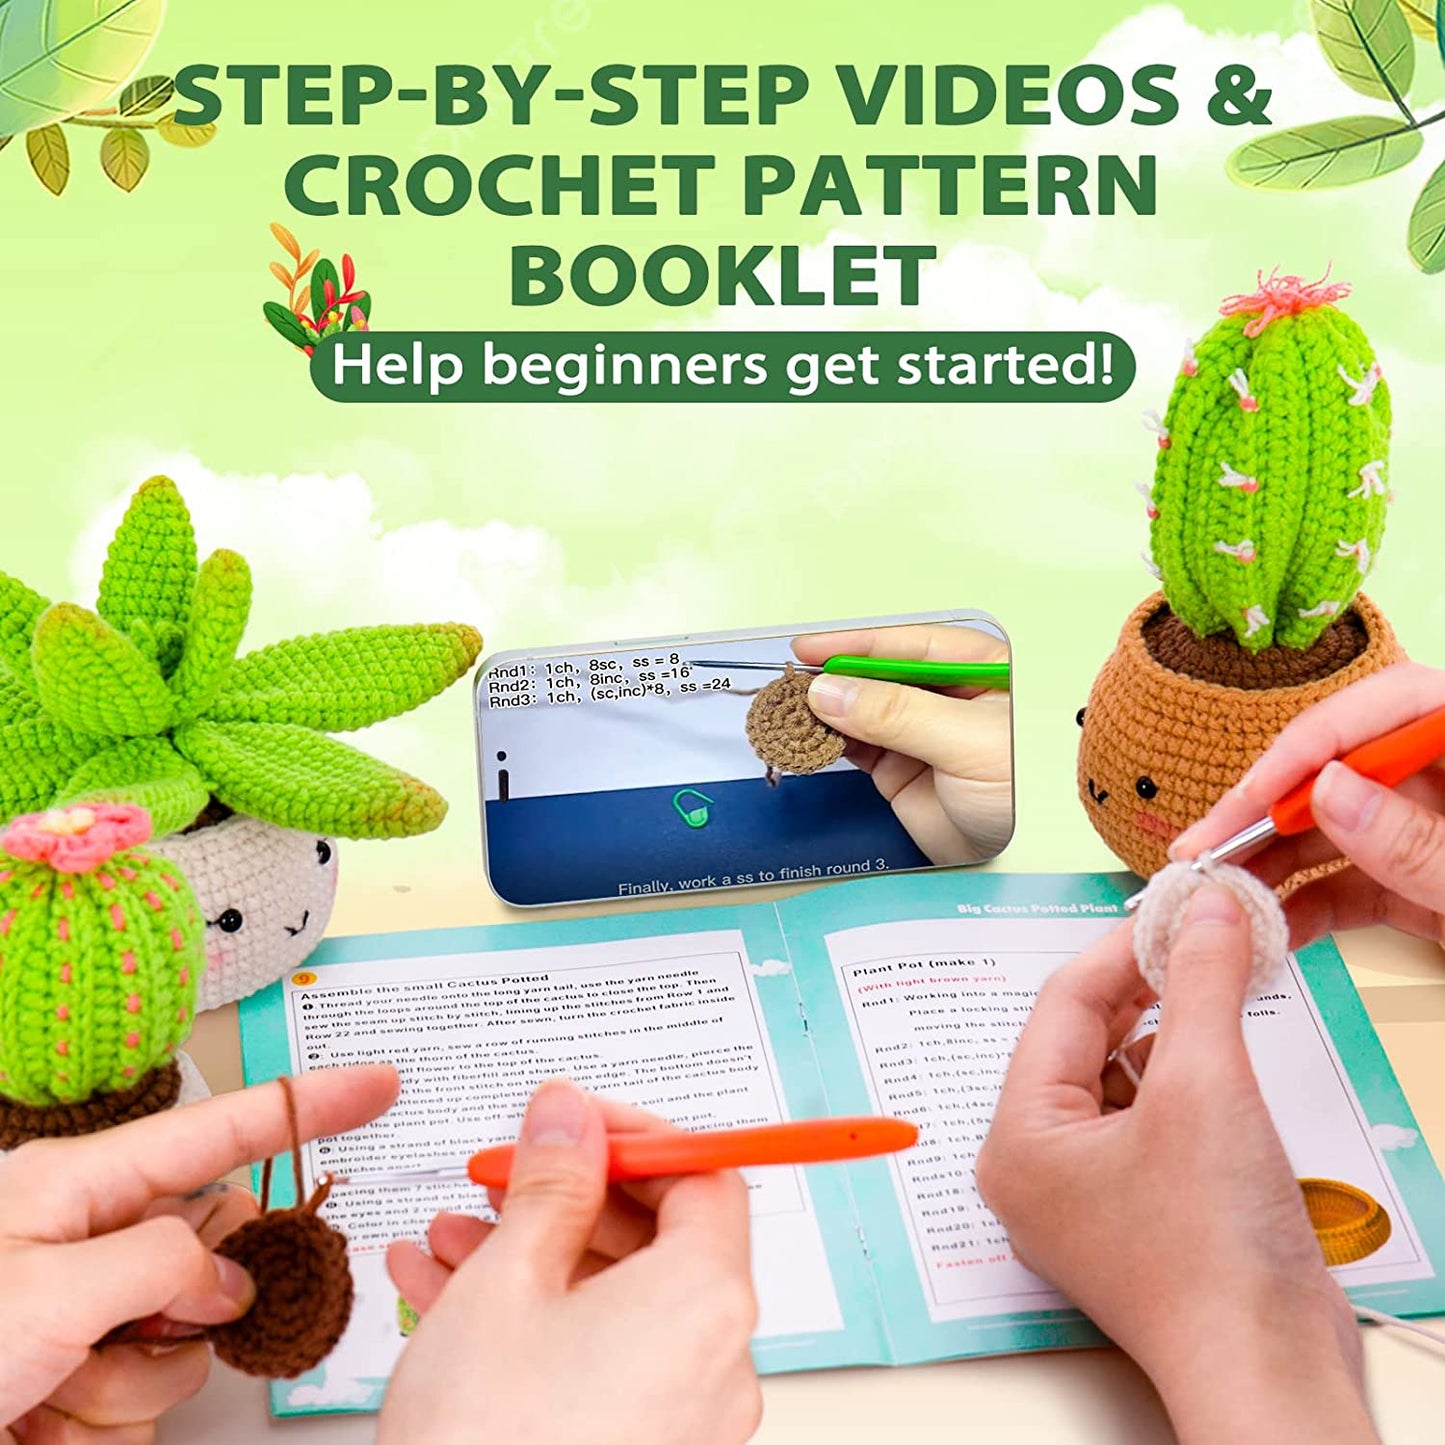 Crochet Kit for Beginners - Crochet Starter Kit with Step-By-Step Video Tutorials, Learn to Crochet Kits for Adults and Kids, DIY Knitting Supplies, 4 Pack Plants Family(40%+ Yarn)